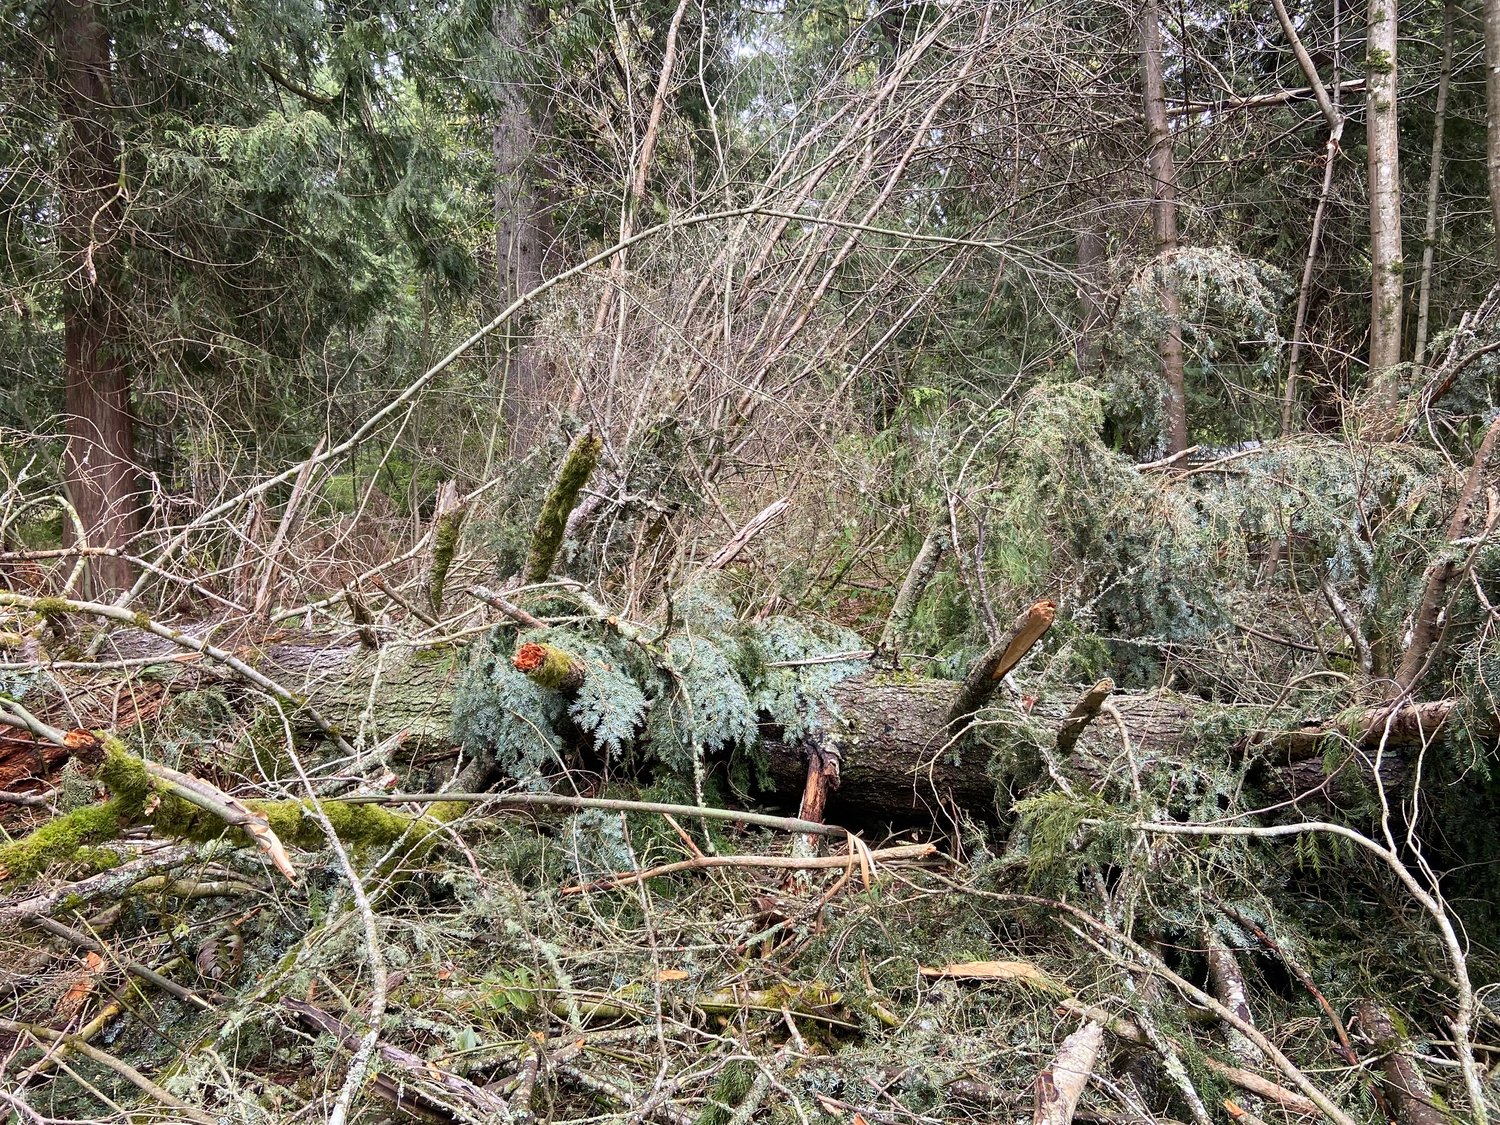 This is part of what fell from the top of the 250-foot-tall cedar tree.